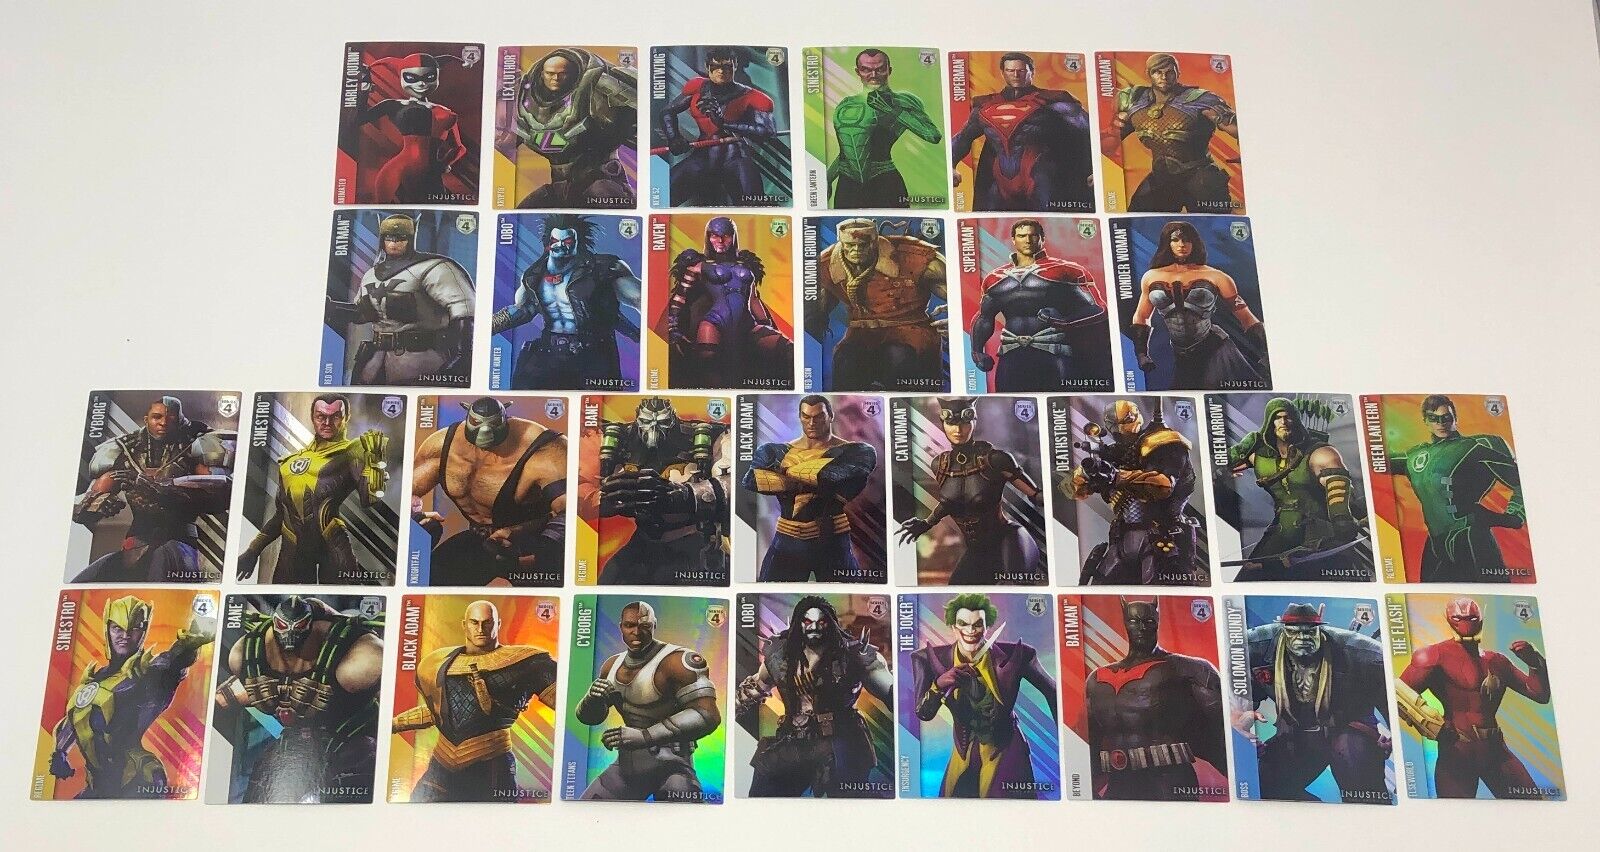 DC Injustice Cards: 30x Common/Uncommon ALL FOIL Series 4 Arcade Game